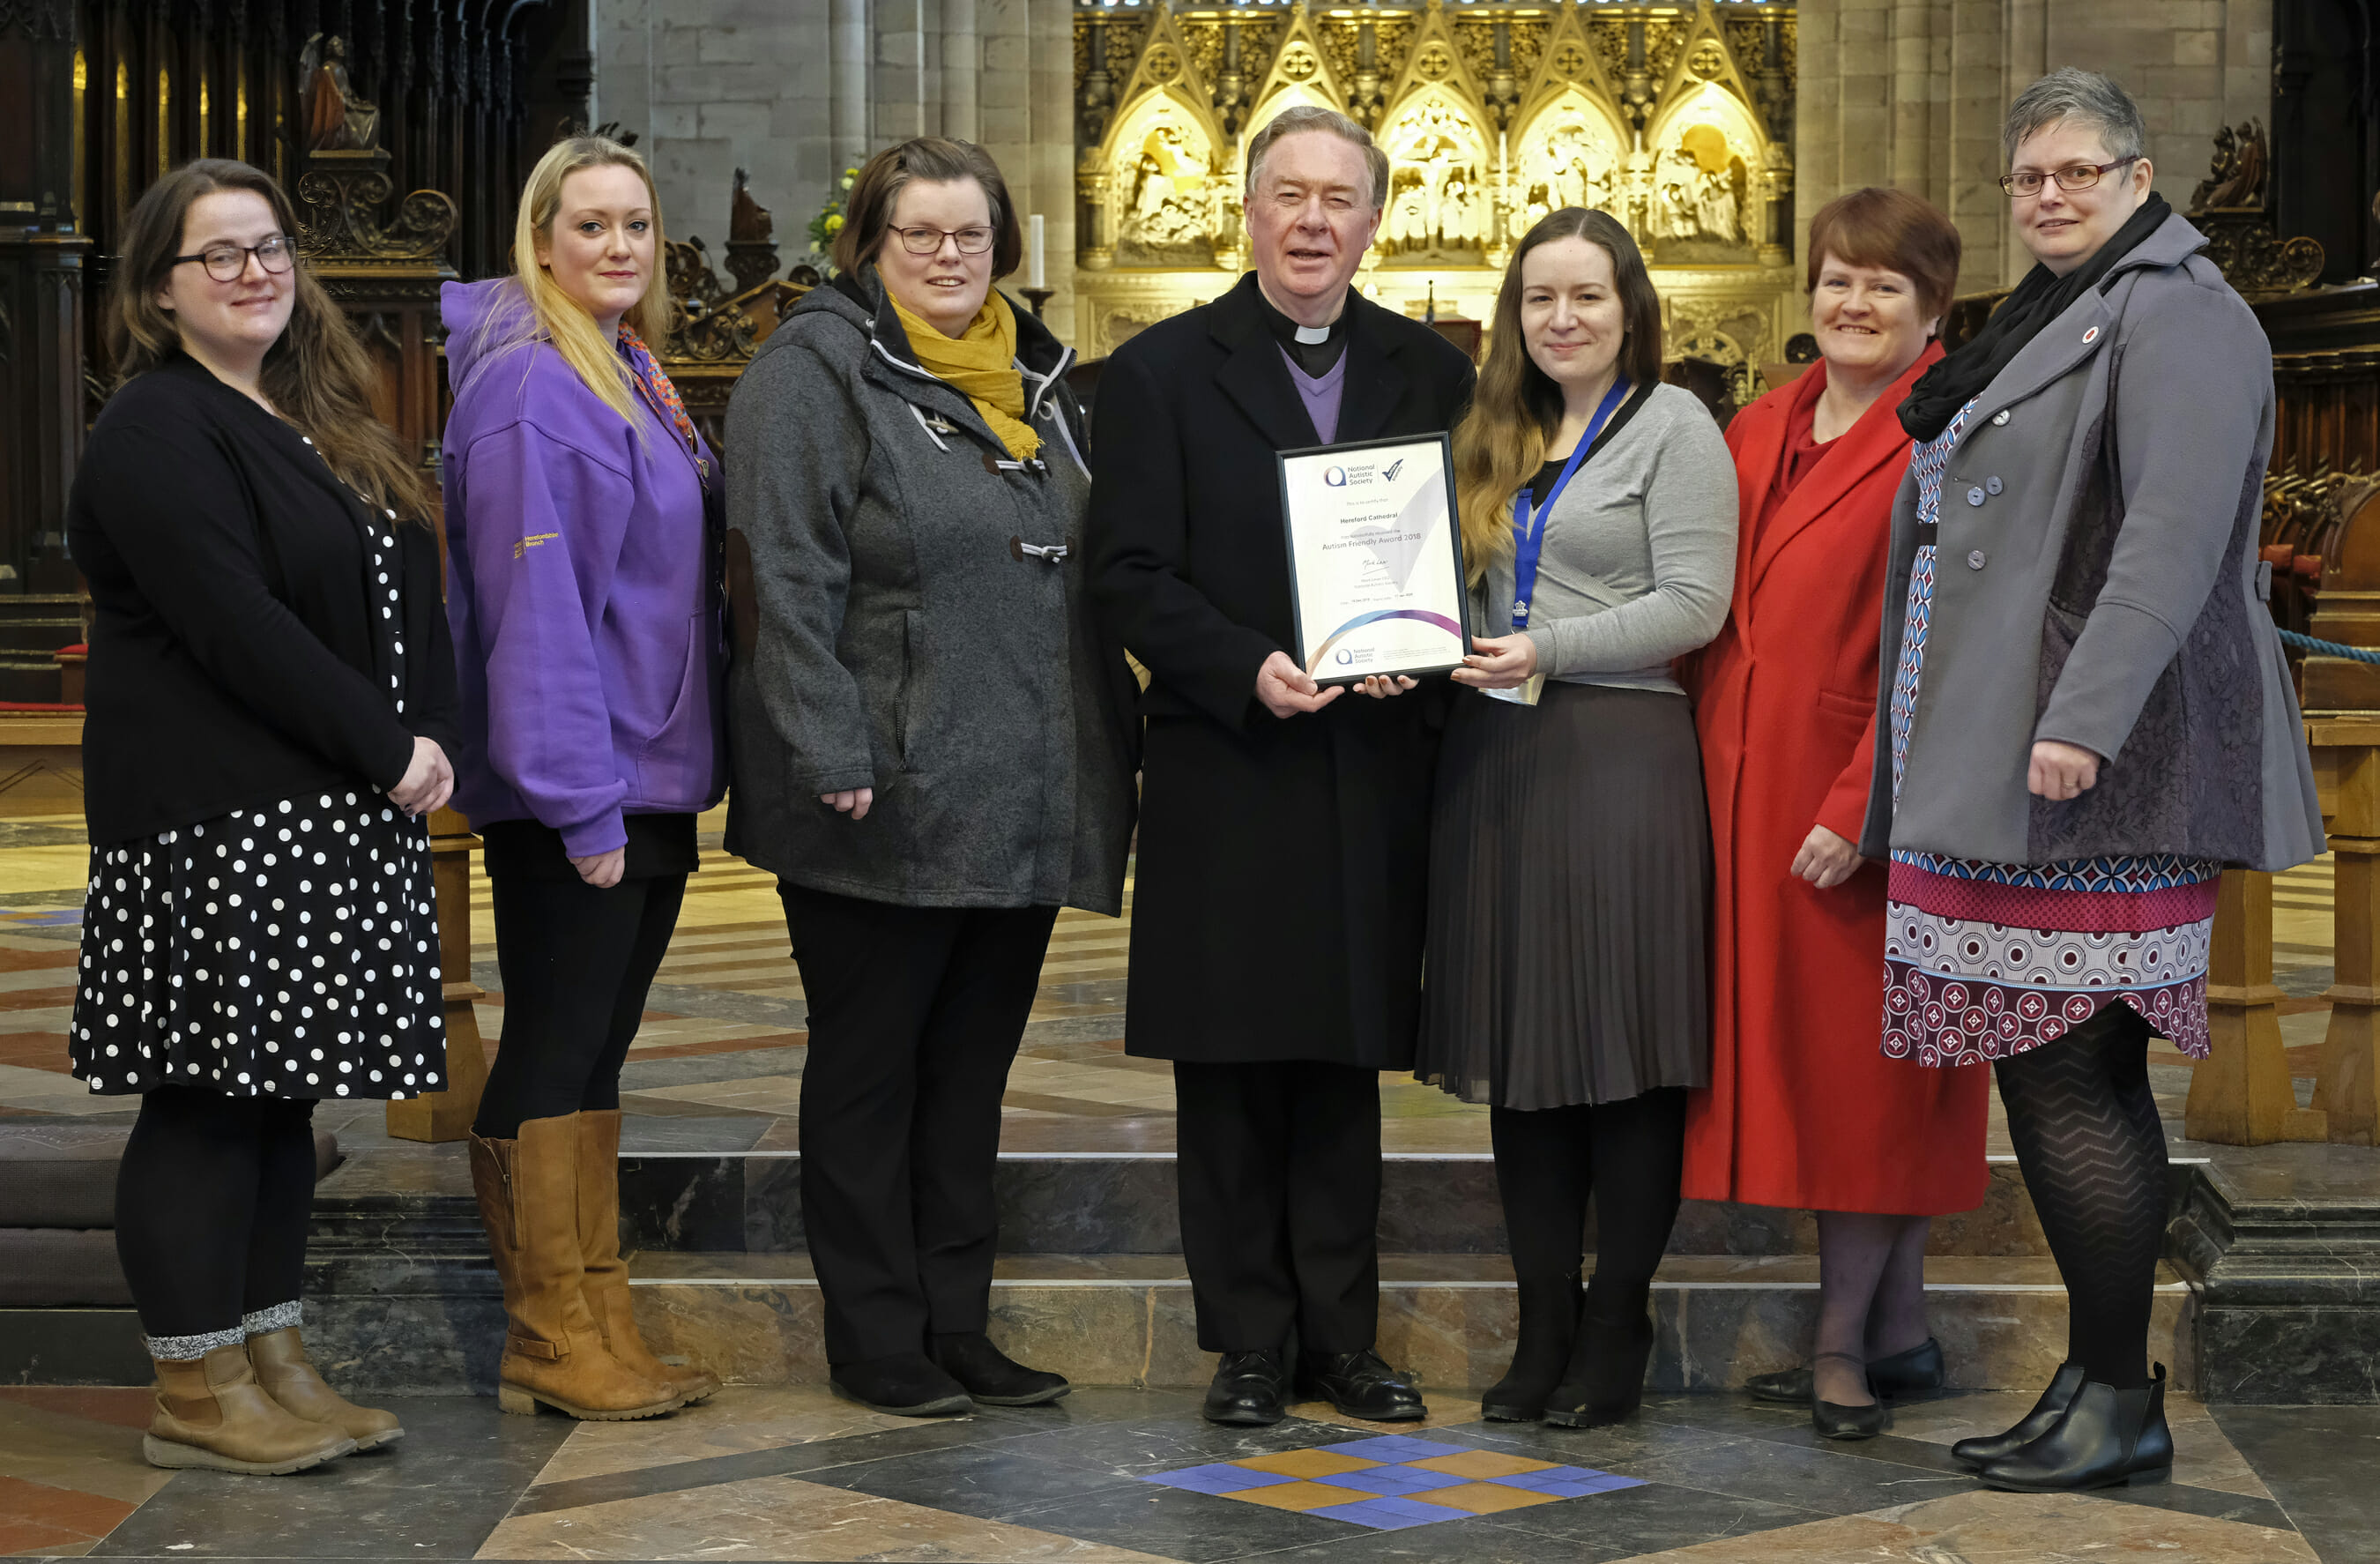 FEATURED | Hereford Cathedral is autism friendly